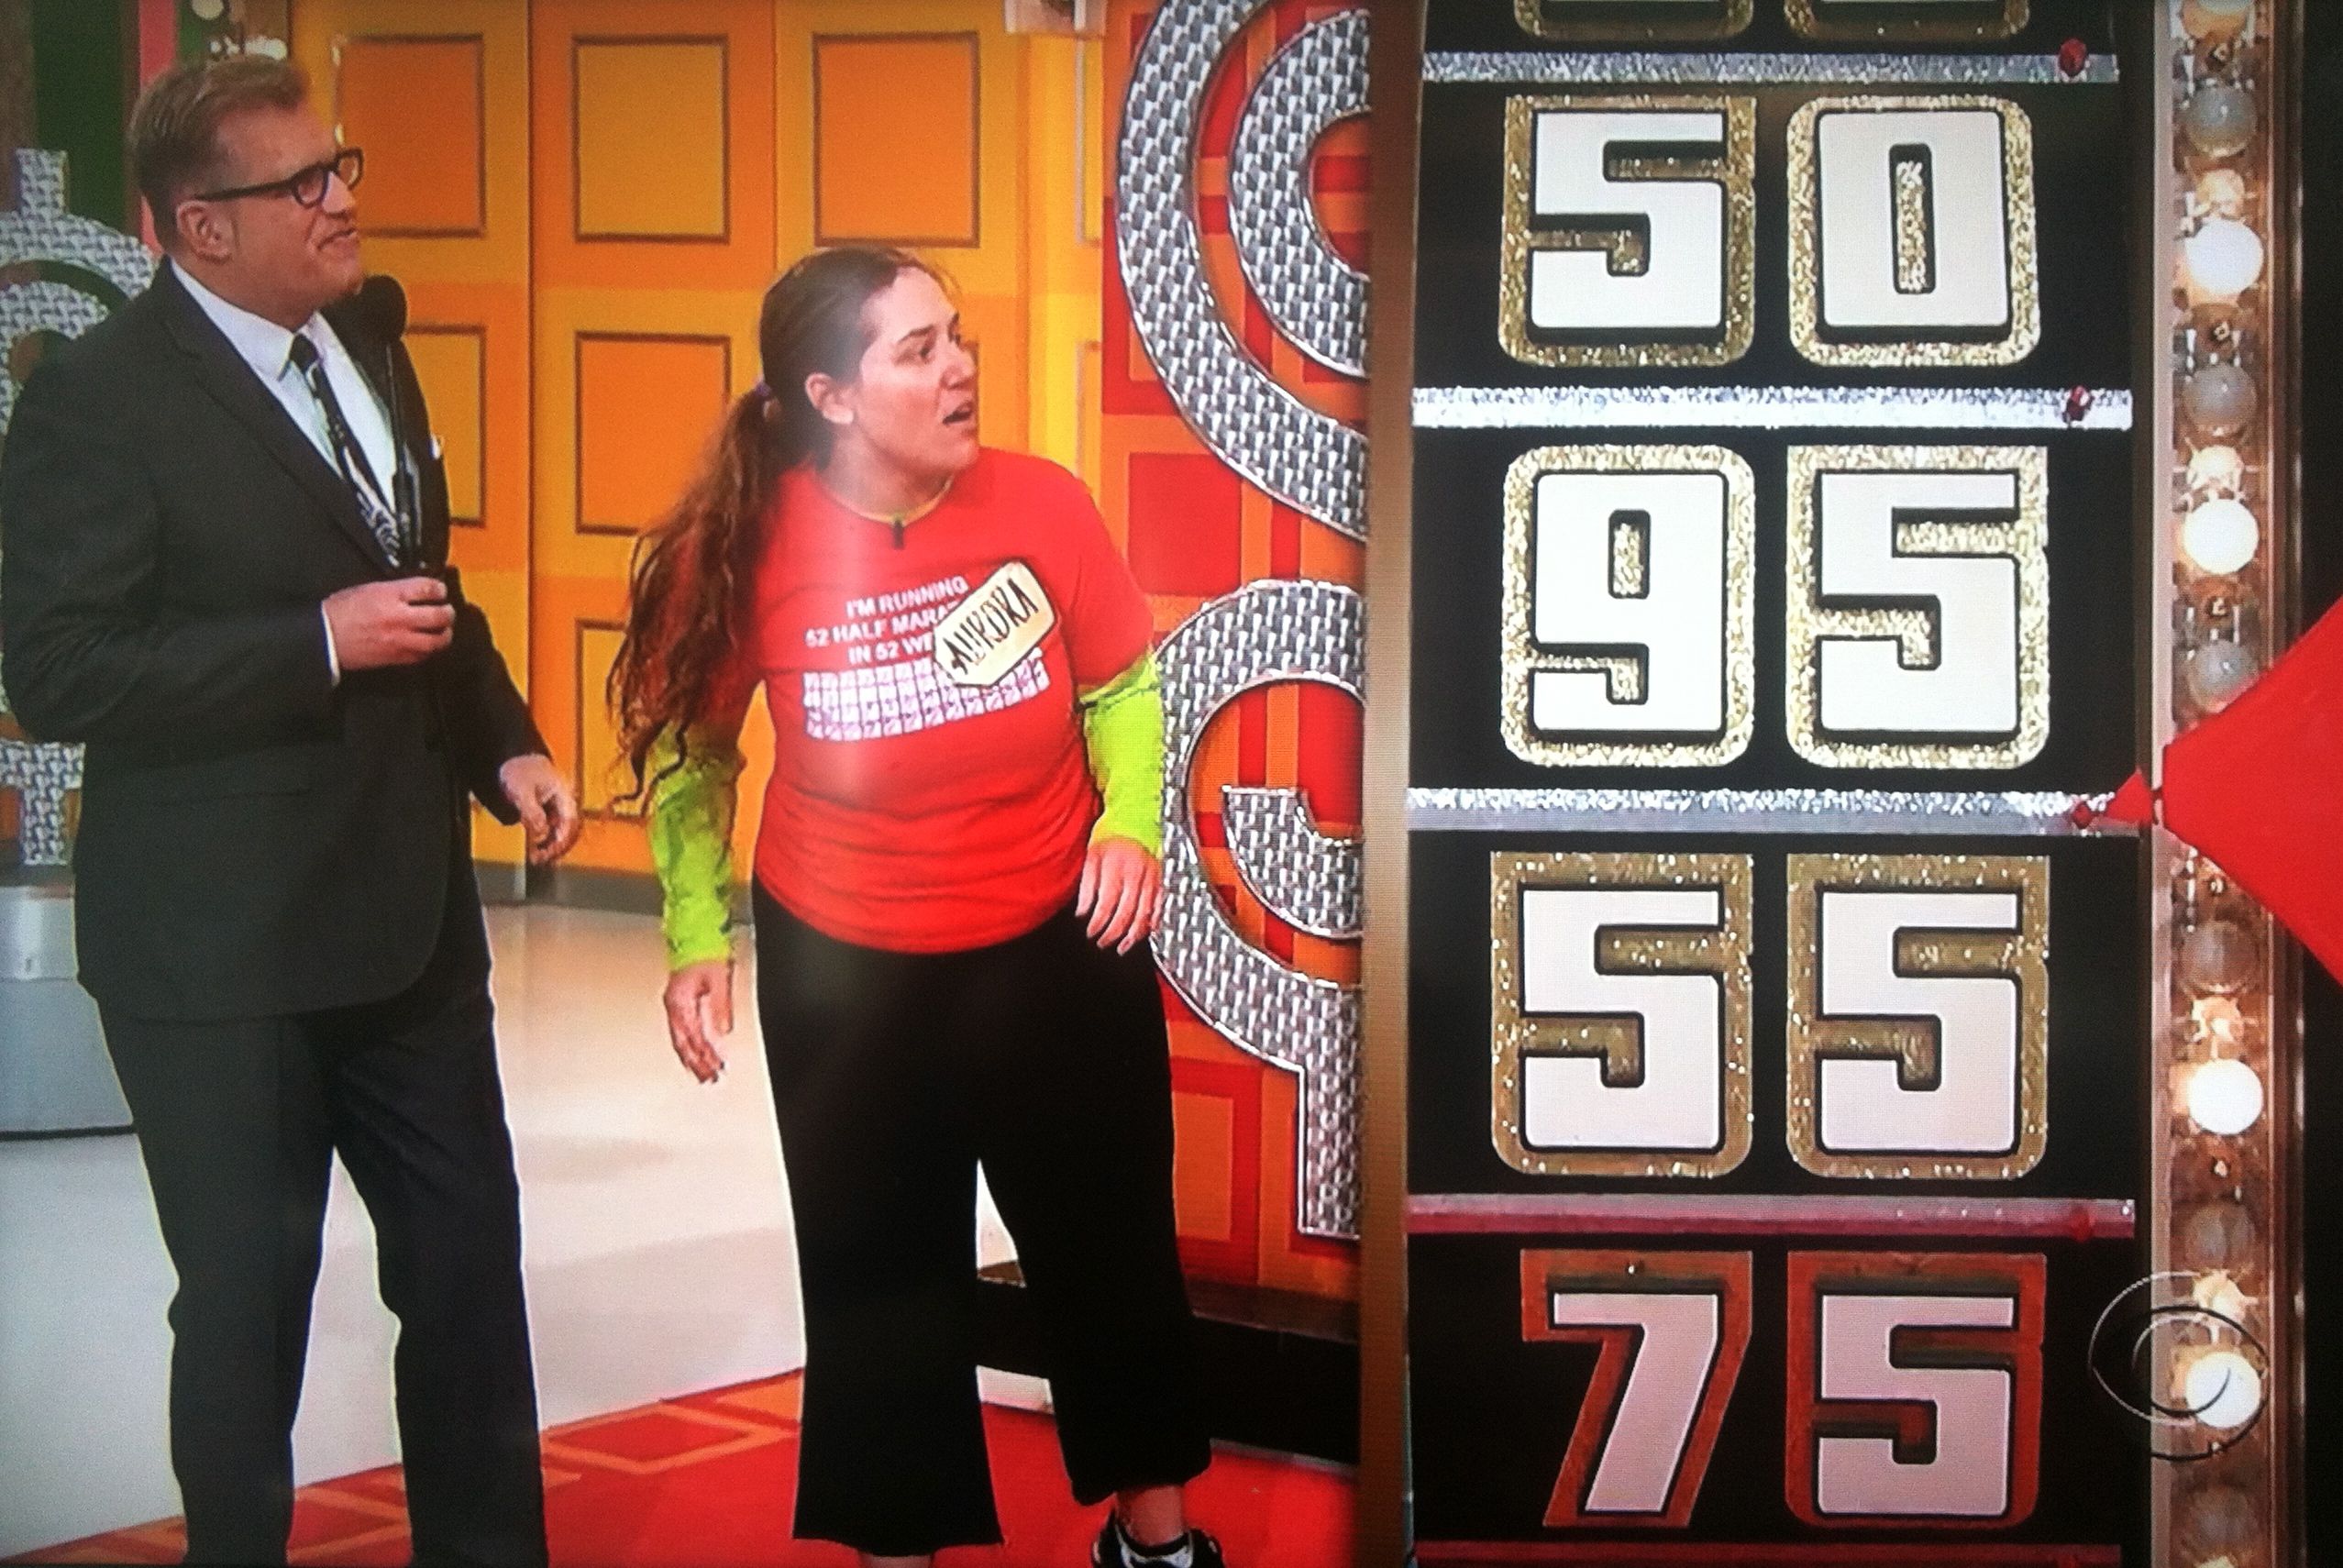 Aurora De Lucia and Drew Carey looking at The Price is Right wheel almost saying 95 cents